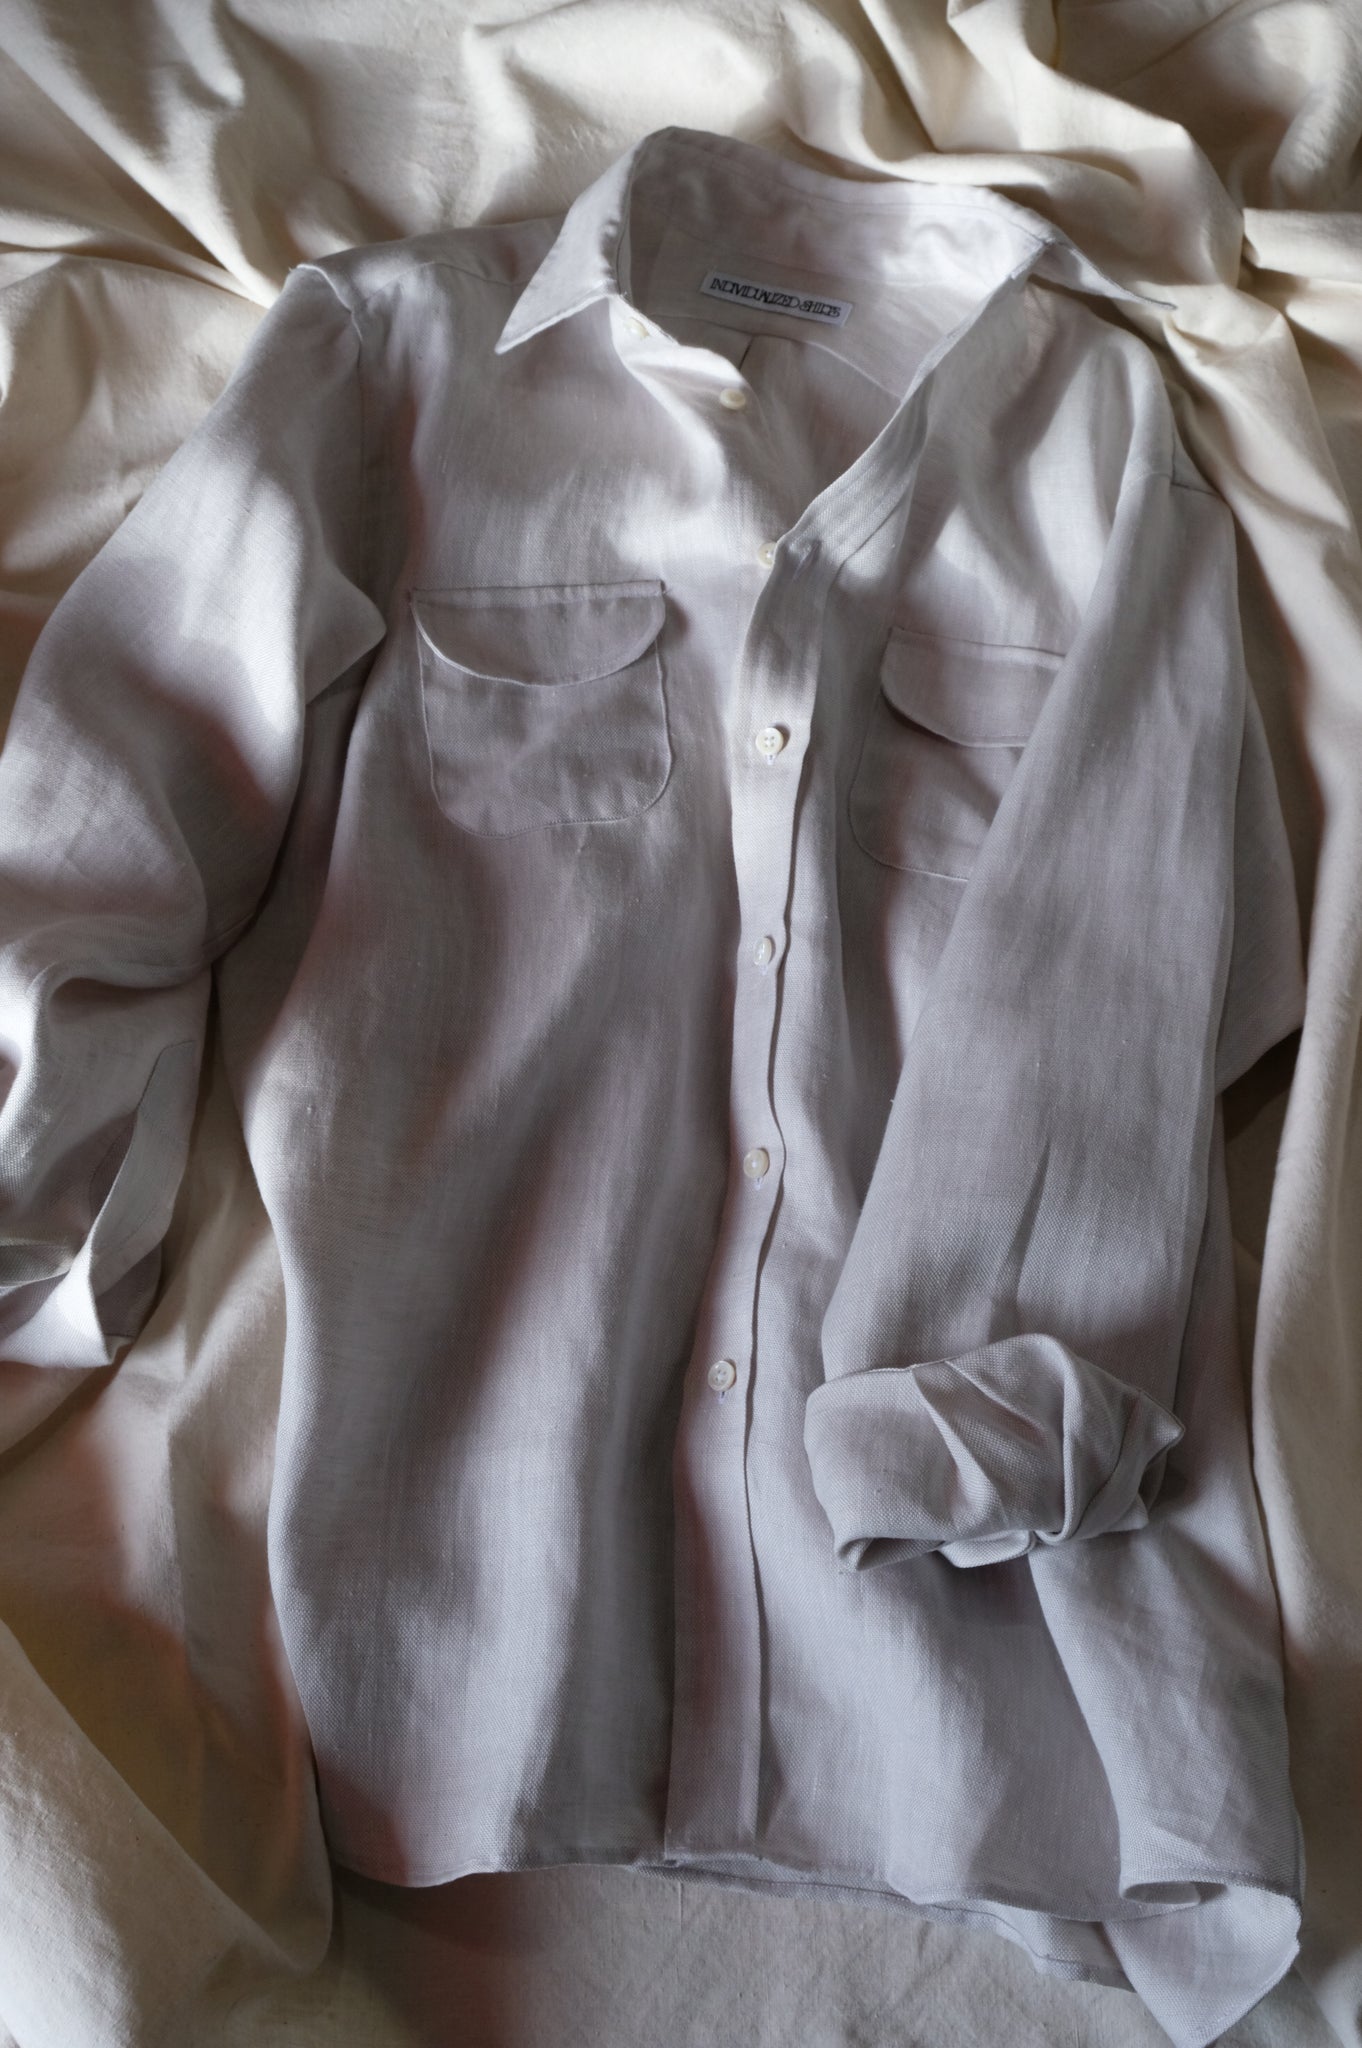 INDIVIDUALIZED SHIRTS "【LOCALERS EXCLUSIVE】HEAVY LINEN OXFORD WORK SHIRT"